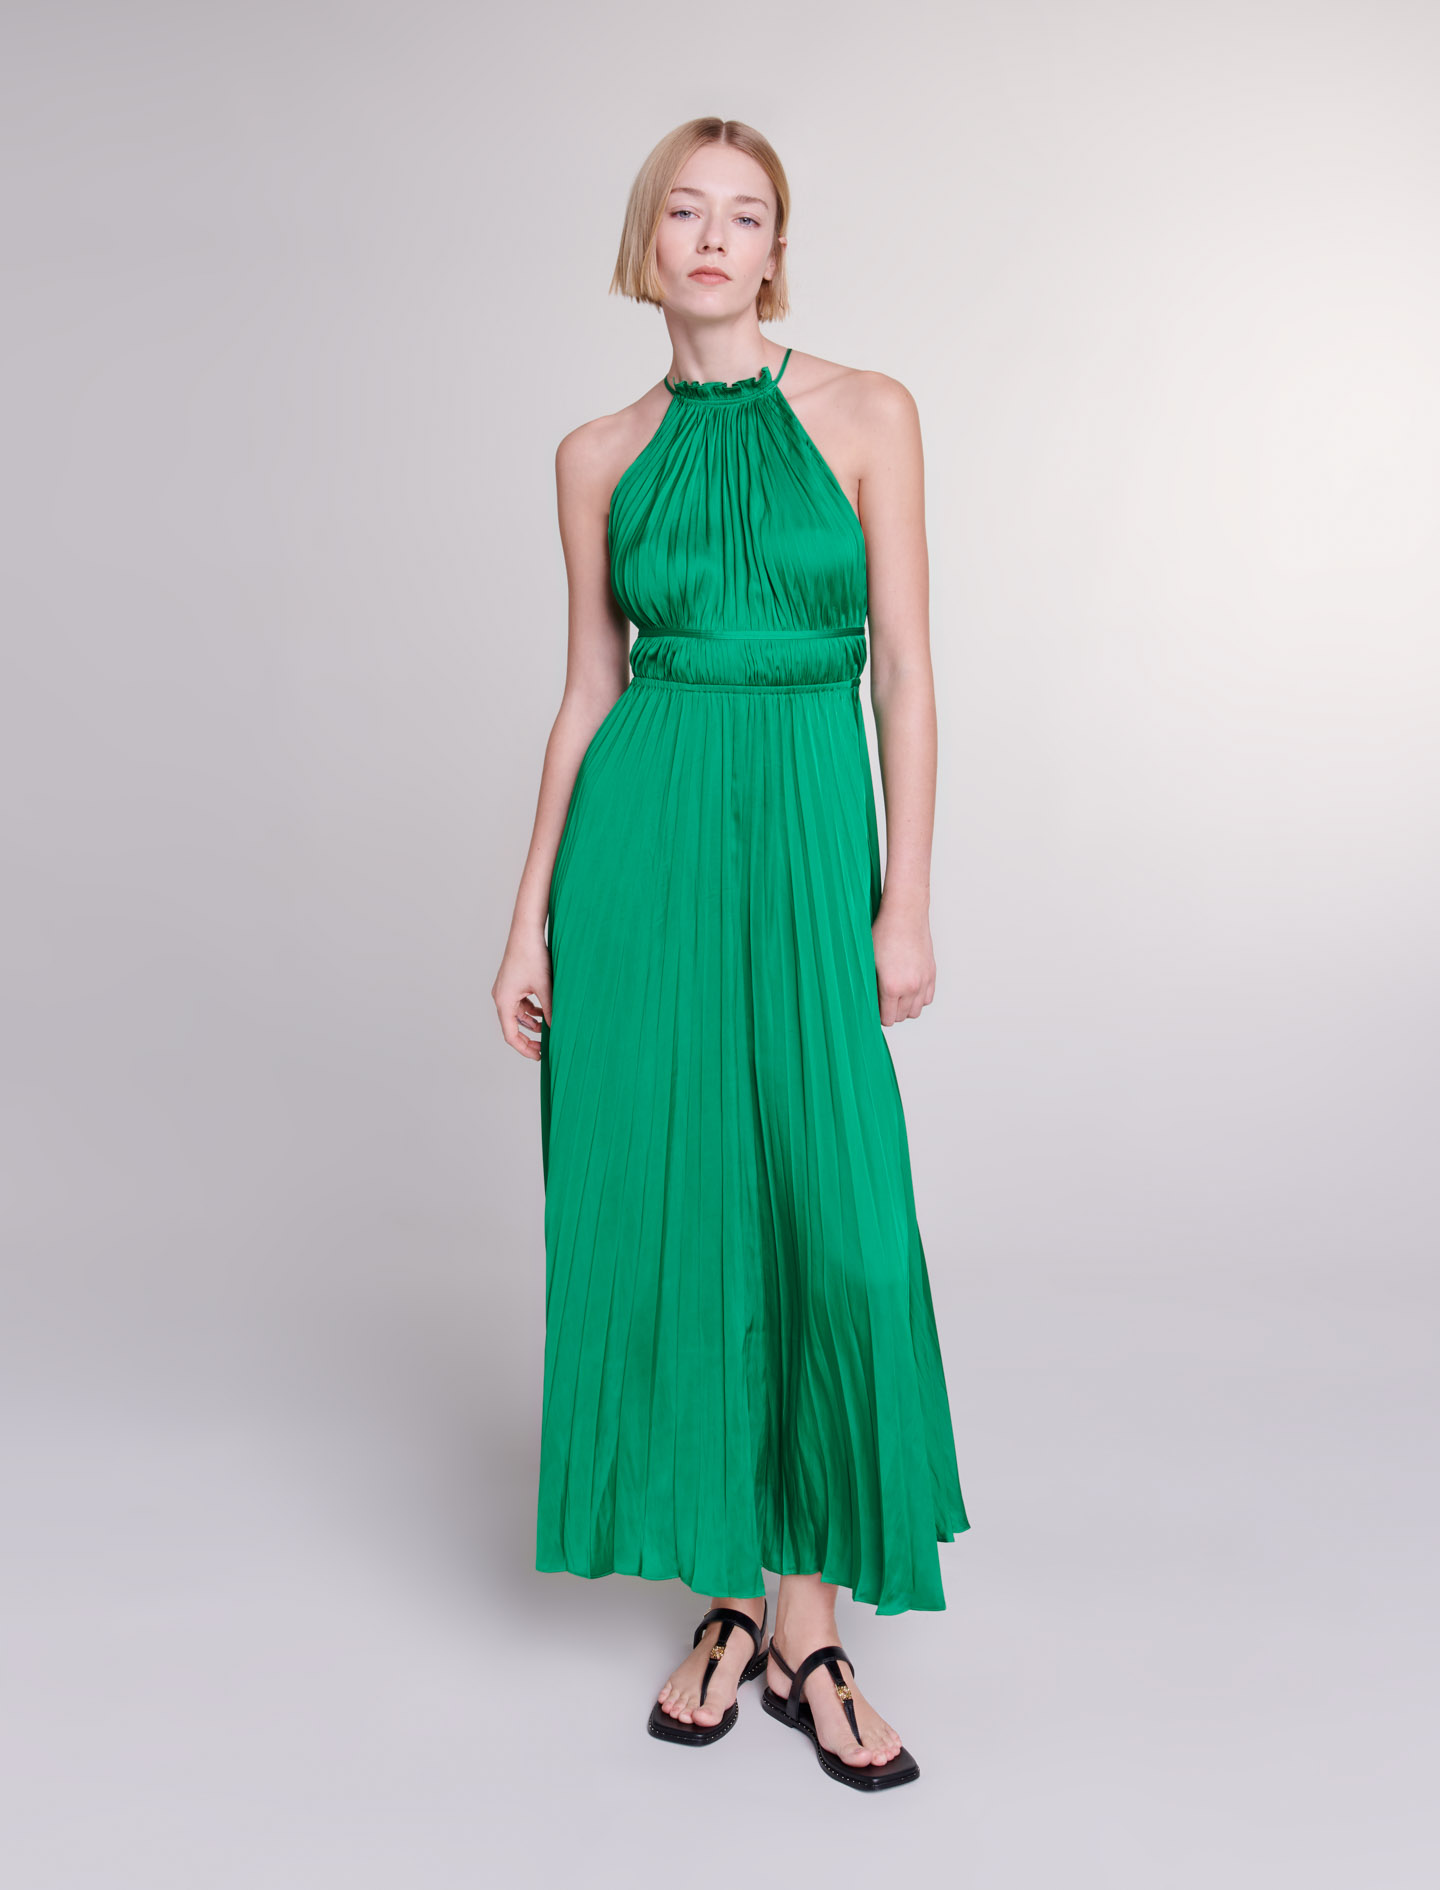 Maje Woman's polyester Pleated satin maxi dress for Spring/Summer, in color Green / Grey